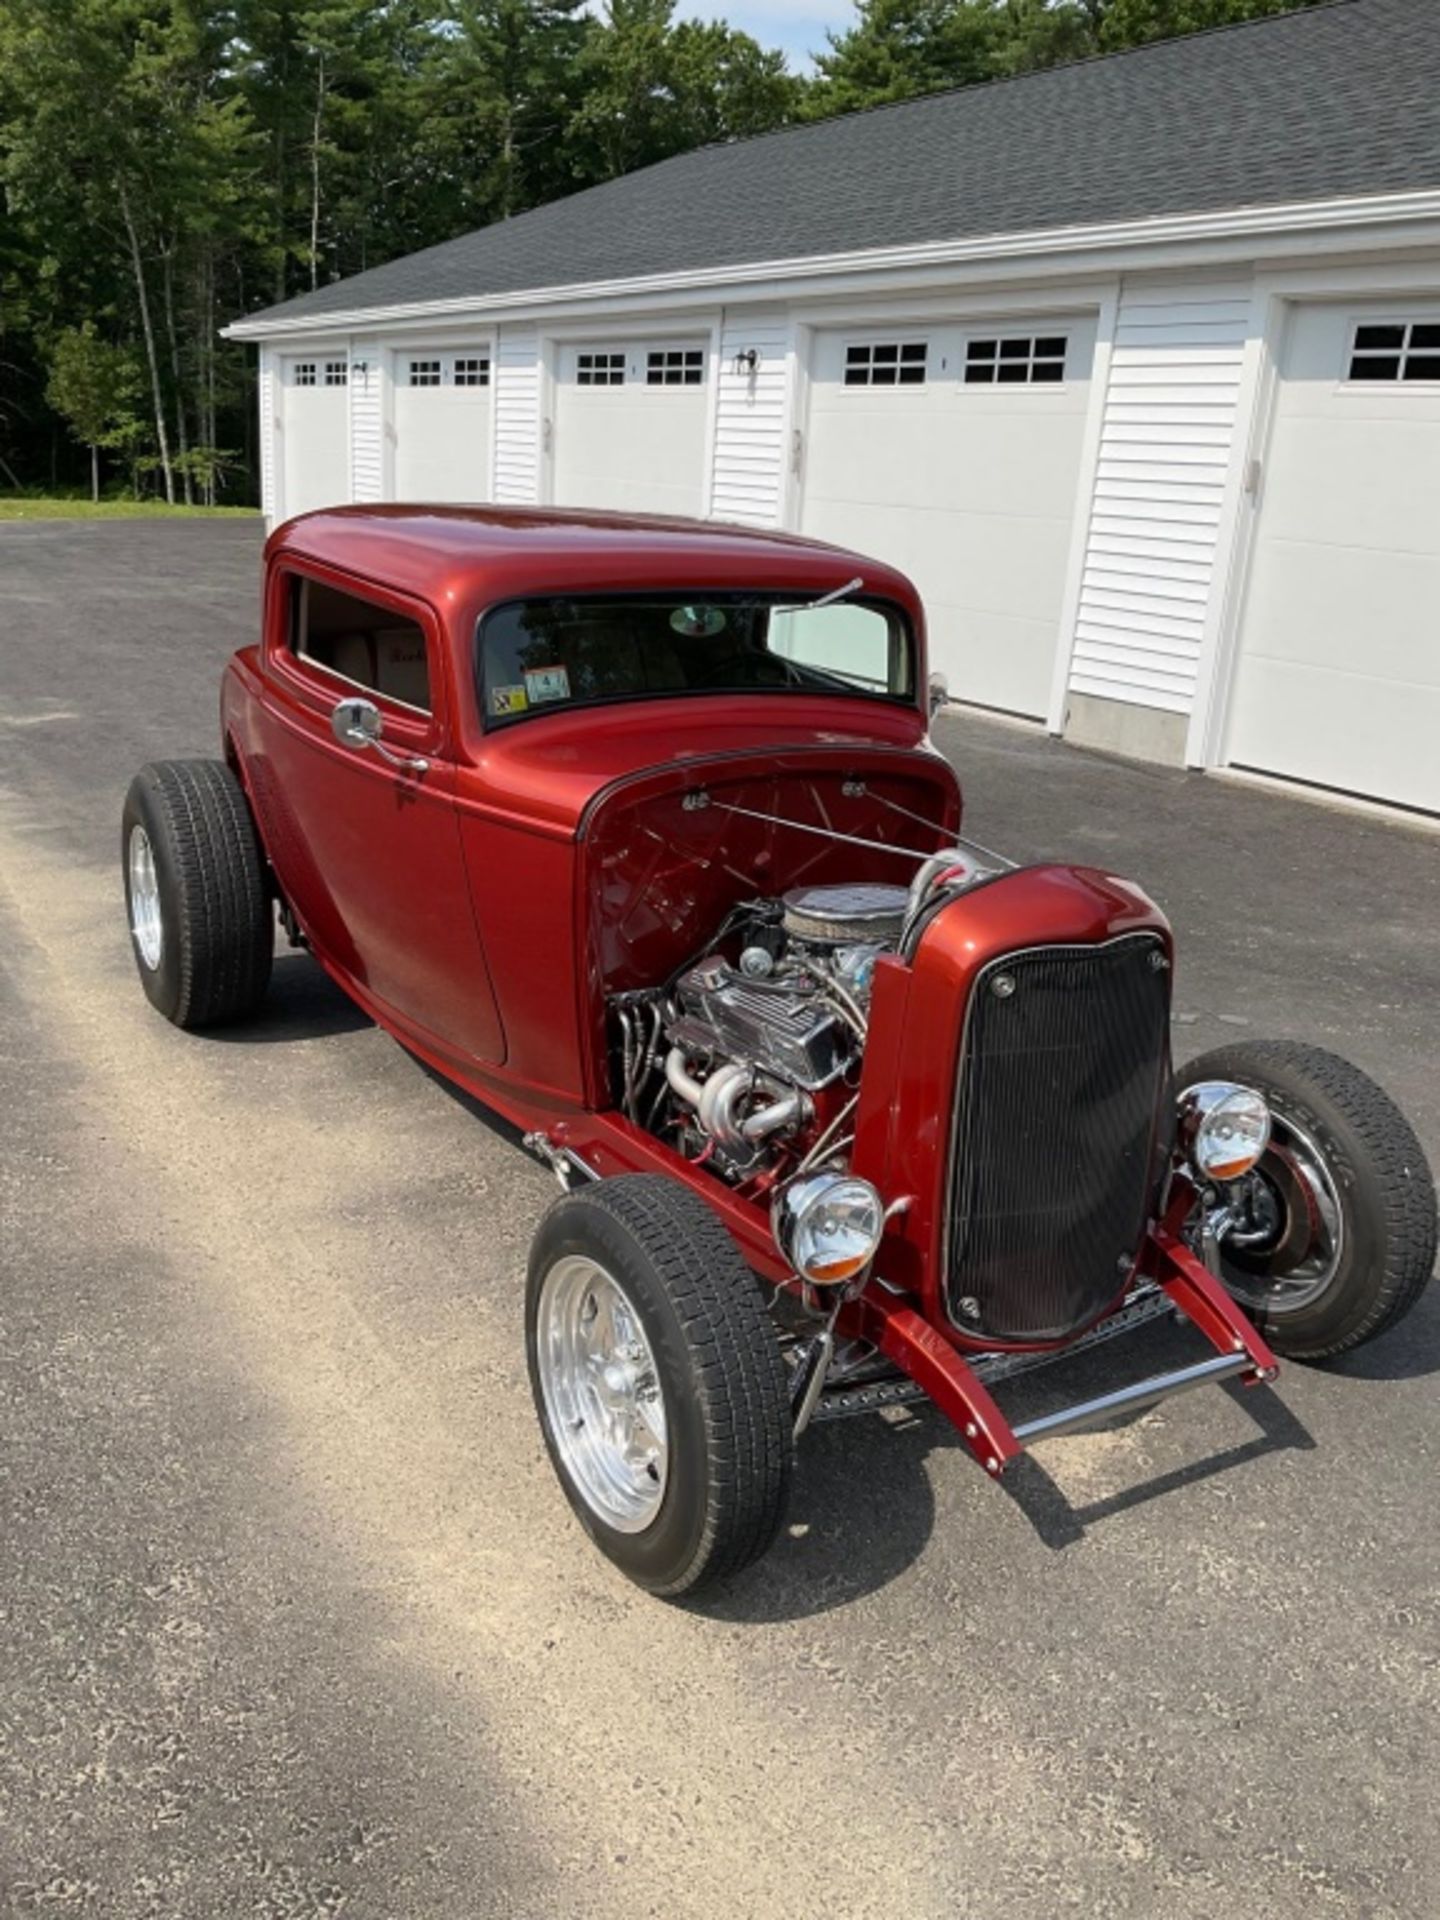 1932 Ford Deuce Coupe Replica - Image 4 of 14